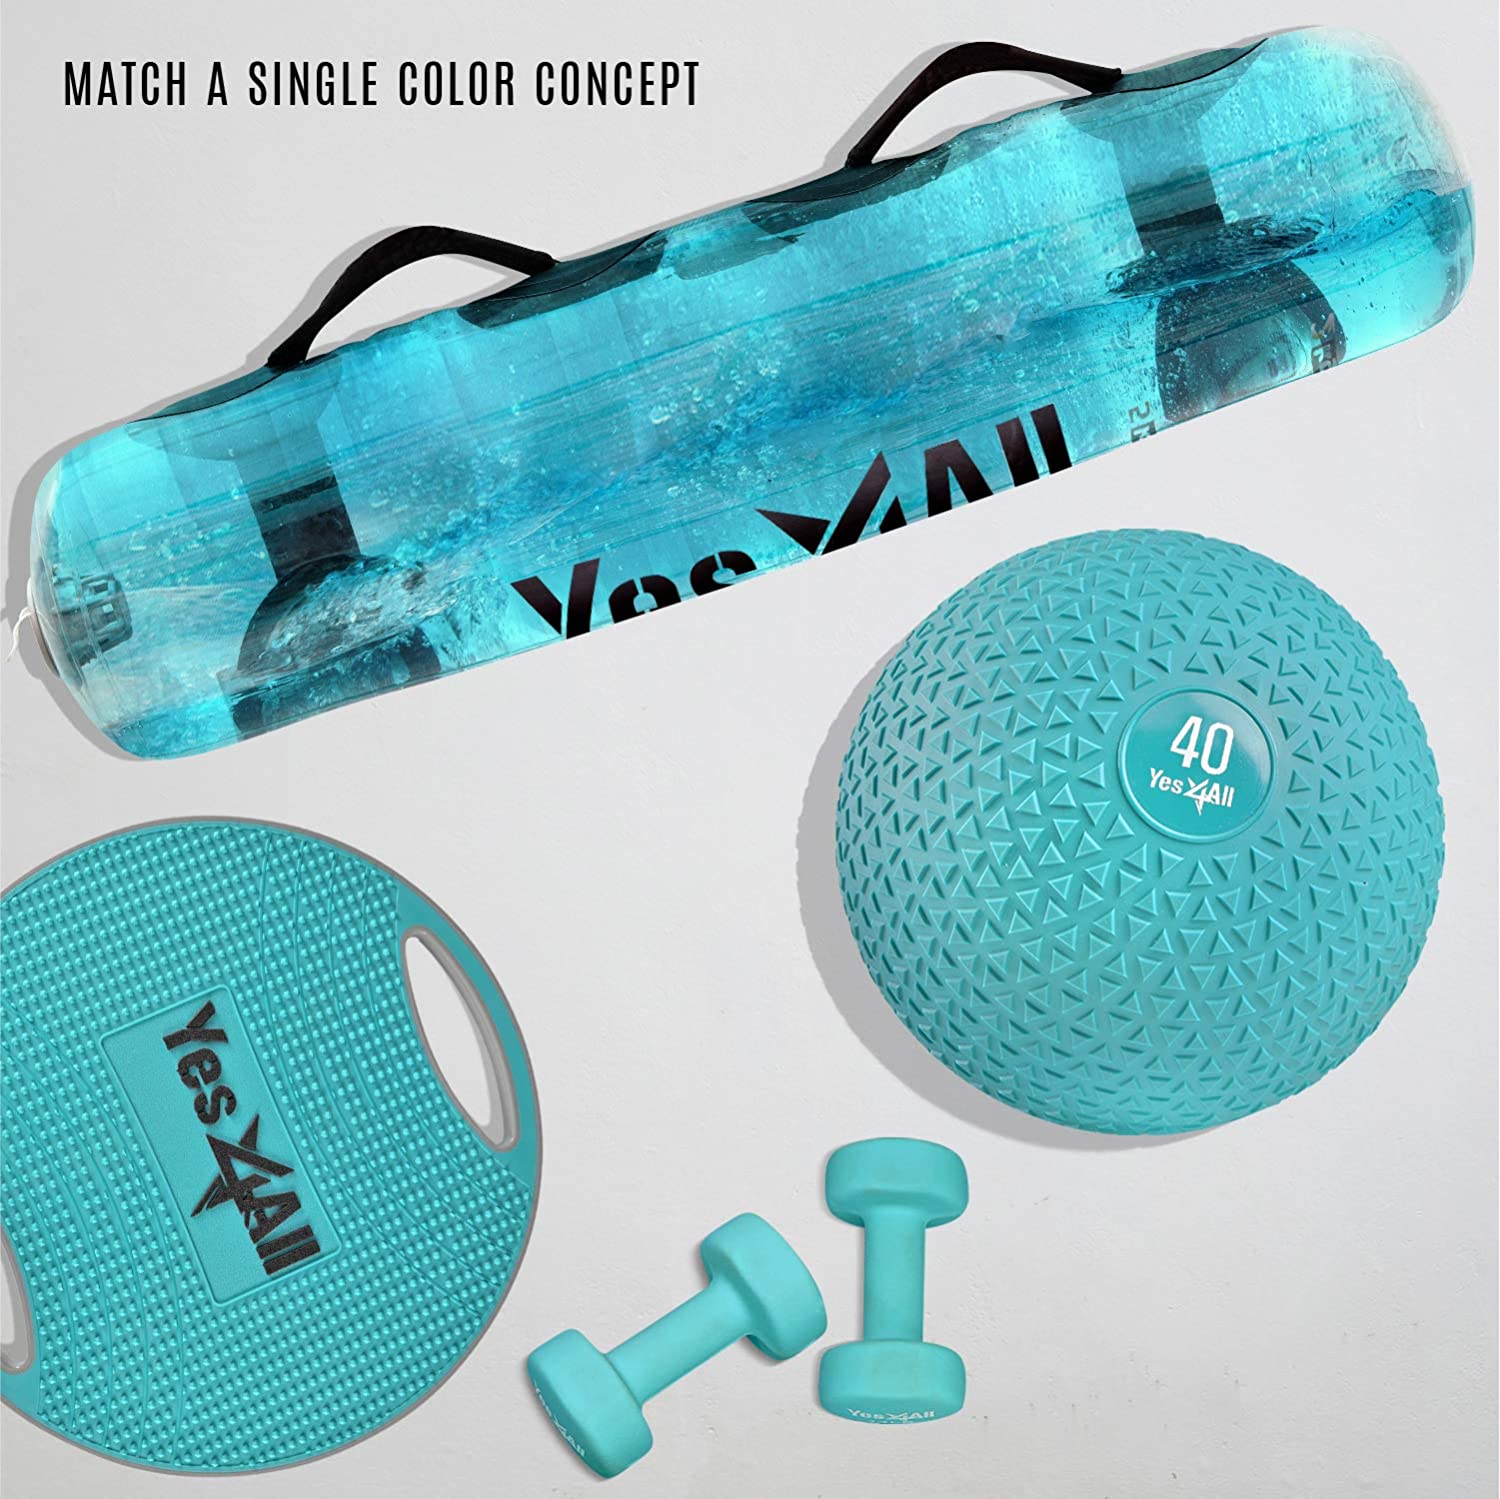 Yes4All 40lbs Slam Medicine Ball Triangle Teal - image 5 of 8